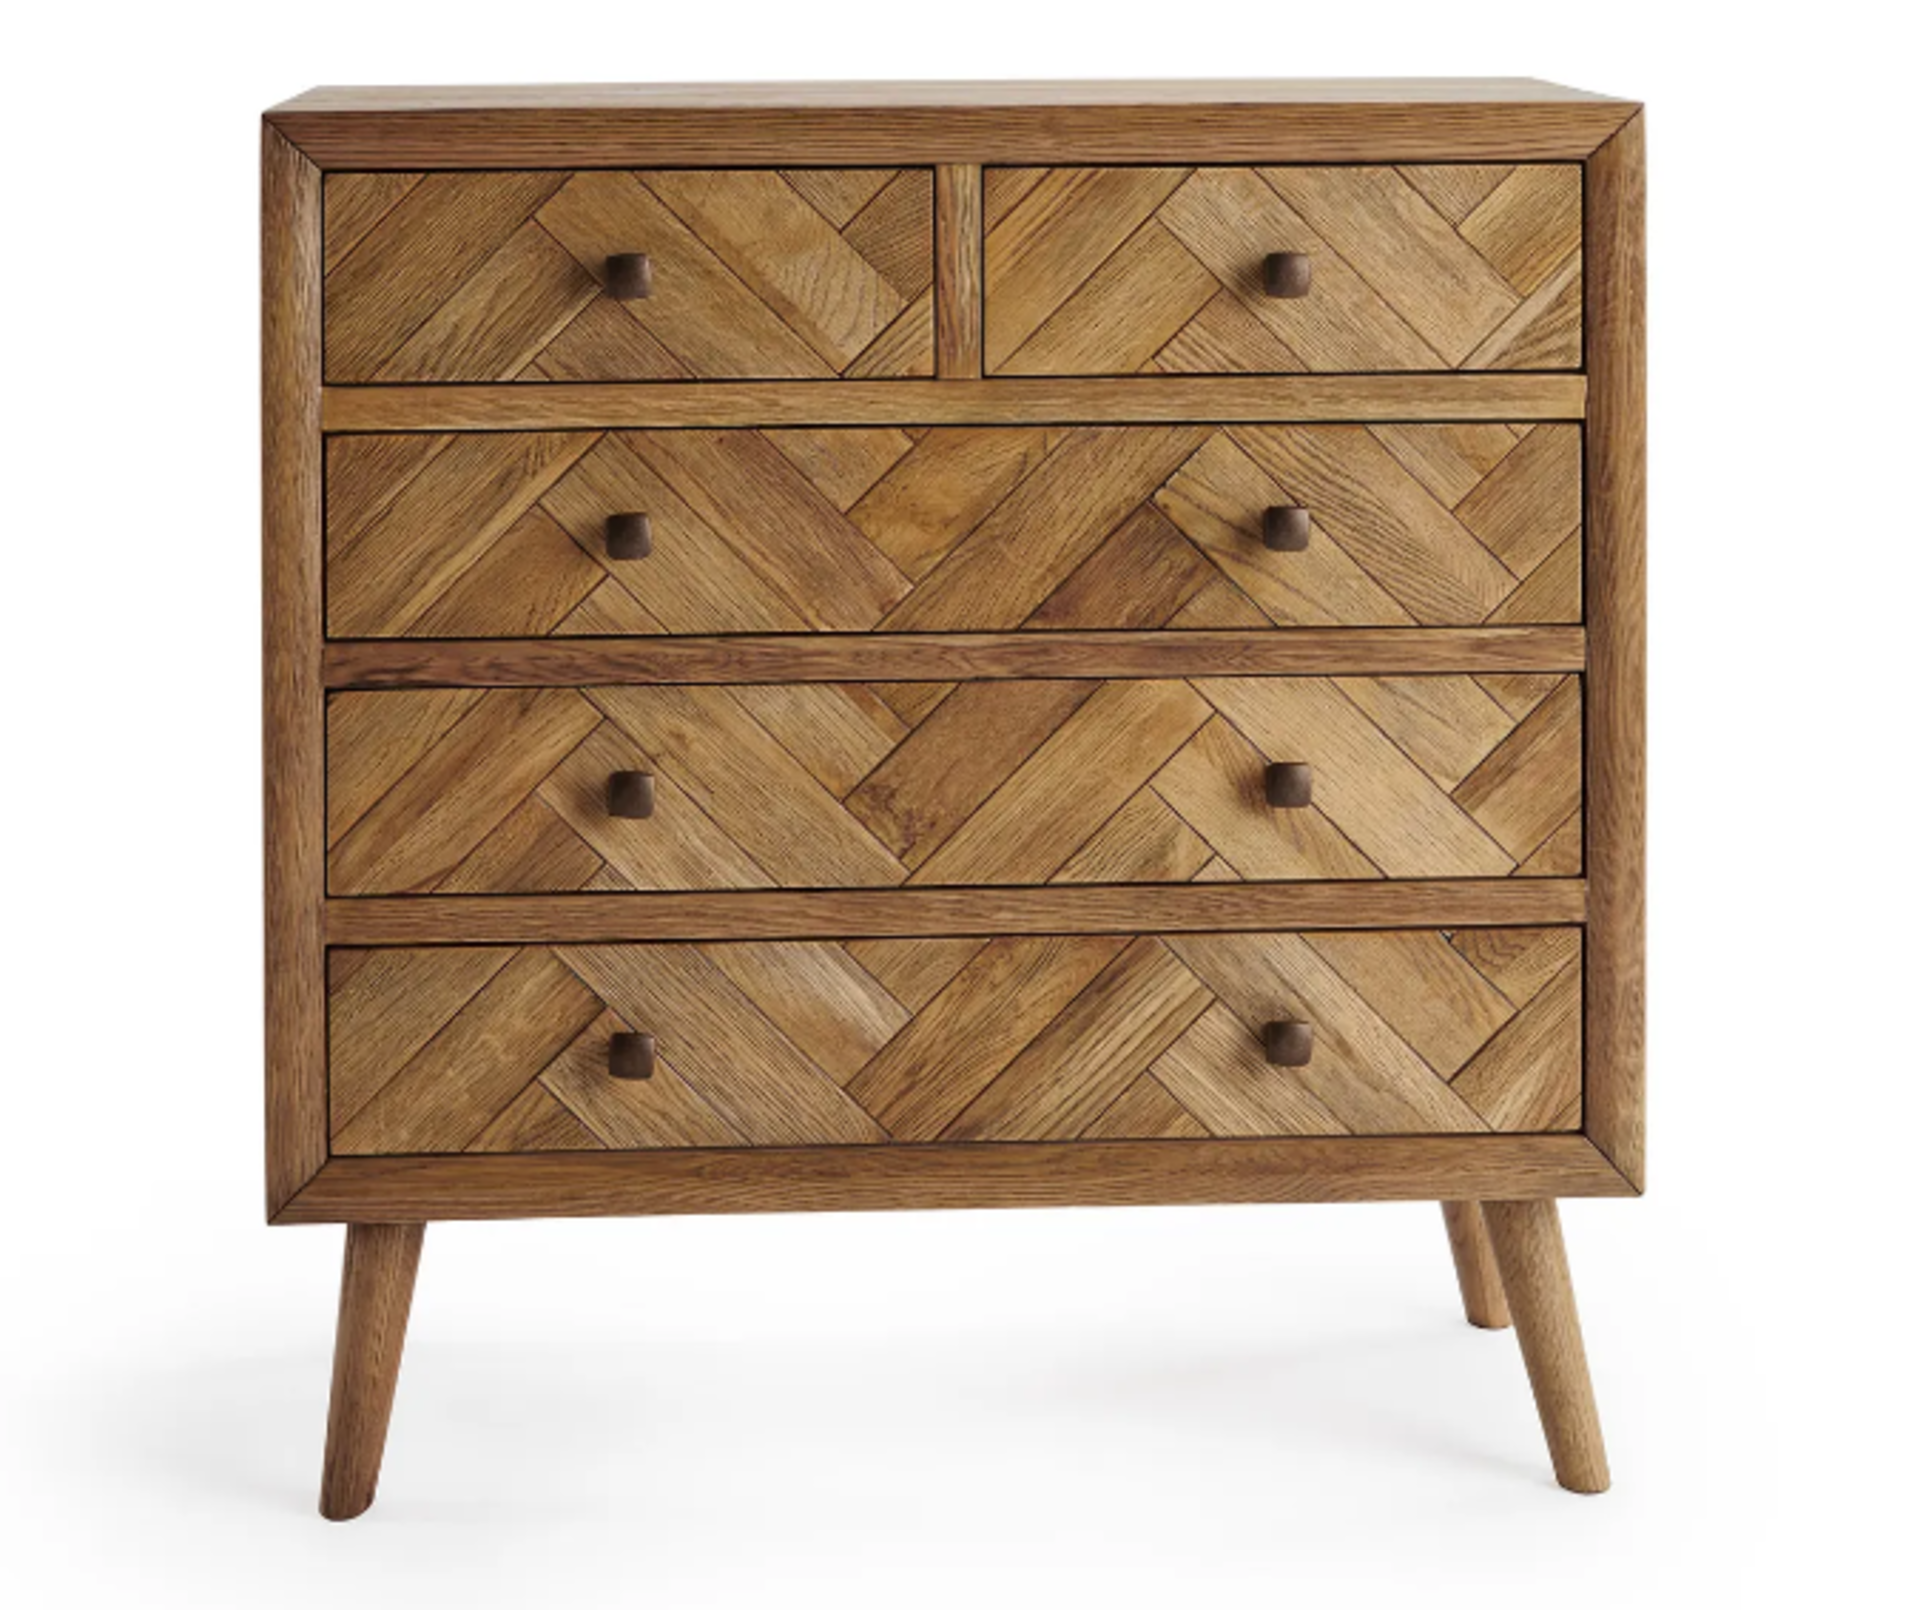 PARQUET Brushed & Glazed Solid Oak 5 Drawer Chest. RRP £515.00. The Parquet 2+3 chest of drawers - Image 2 of 2